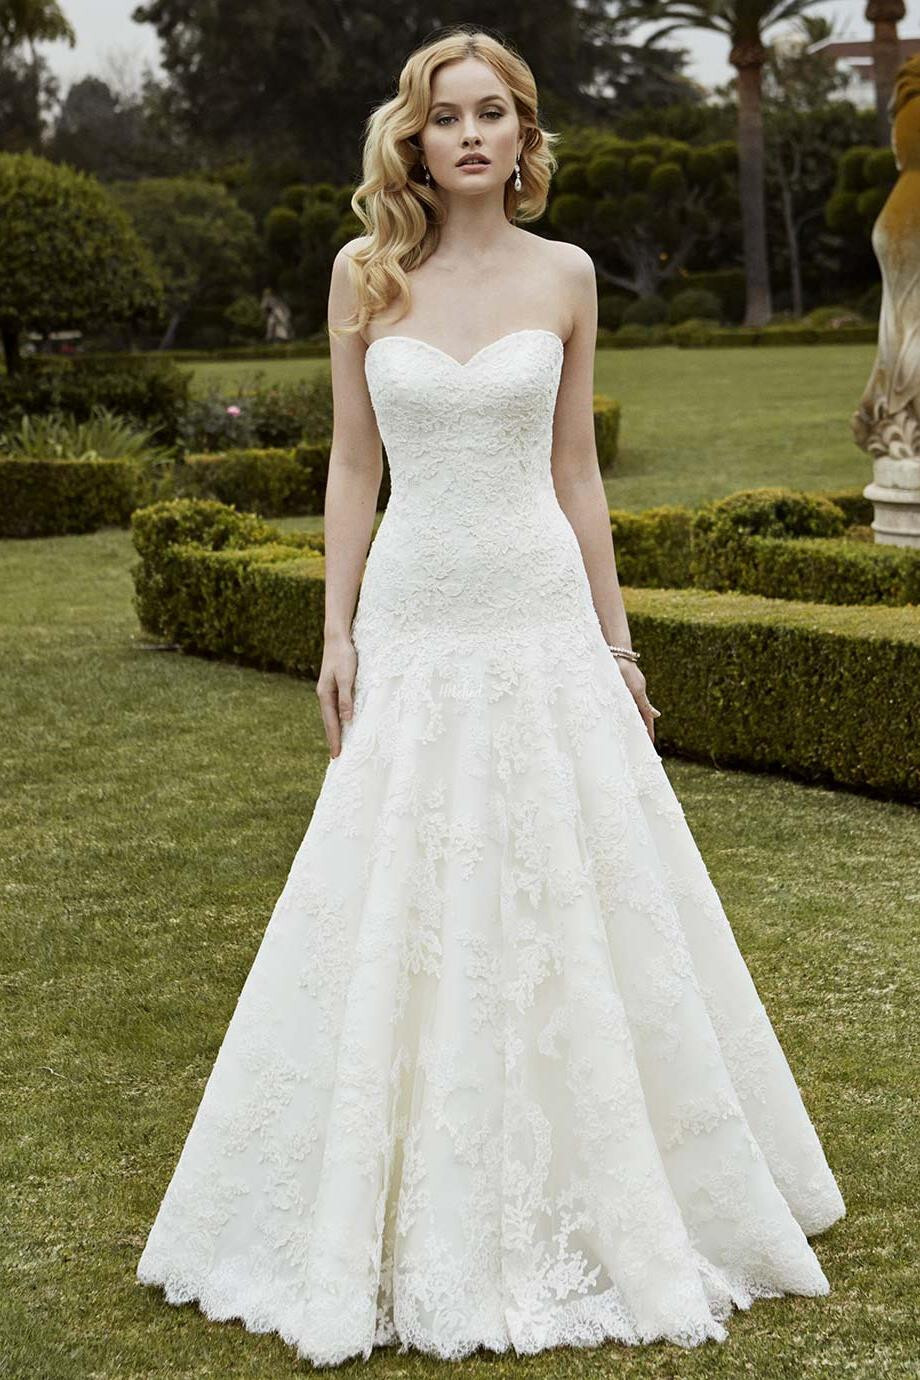 Ithaca Wedding Dress from Blue By Enzoani - hitched.co.uk